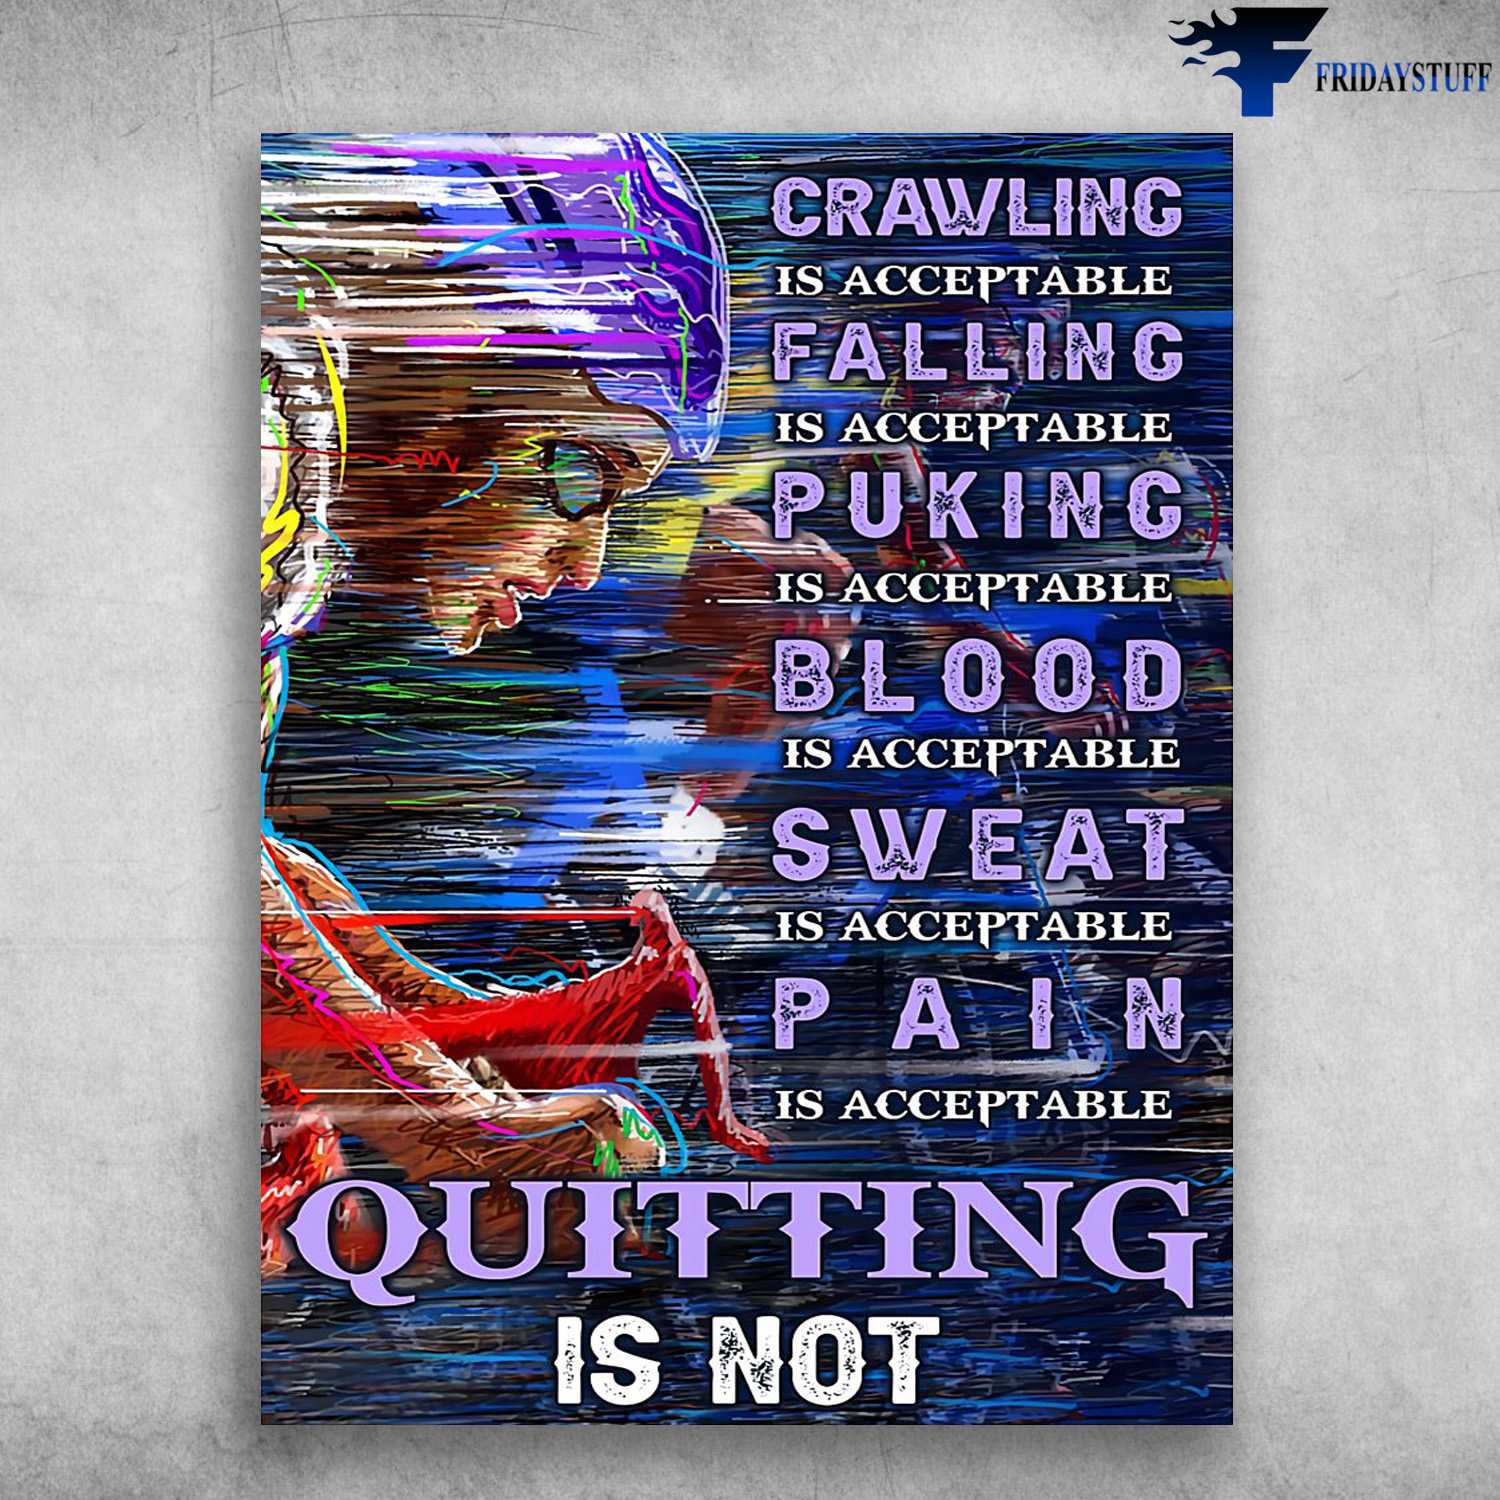 Biker Lover, Cycling Man - Crawling Is Acceptable, Falling Is Acceptable, Puking Is Acceptable, Blood Is Acceptable, Sweat Is Acceptable, Pain Is Acceptable, Quitting Is Not